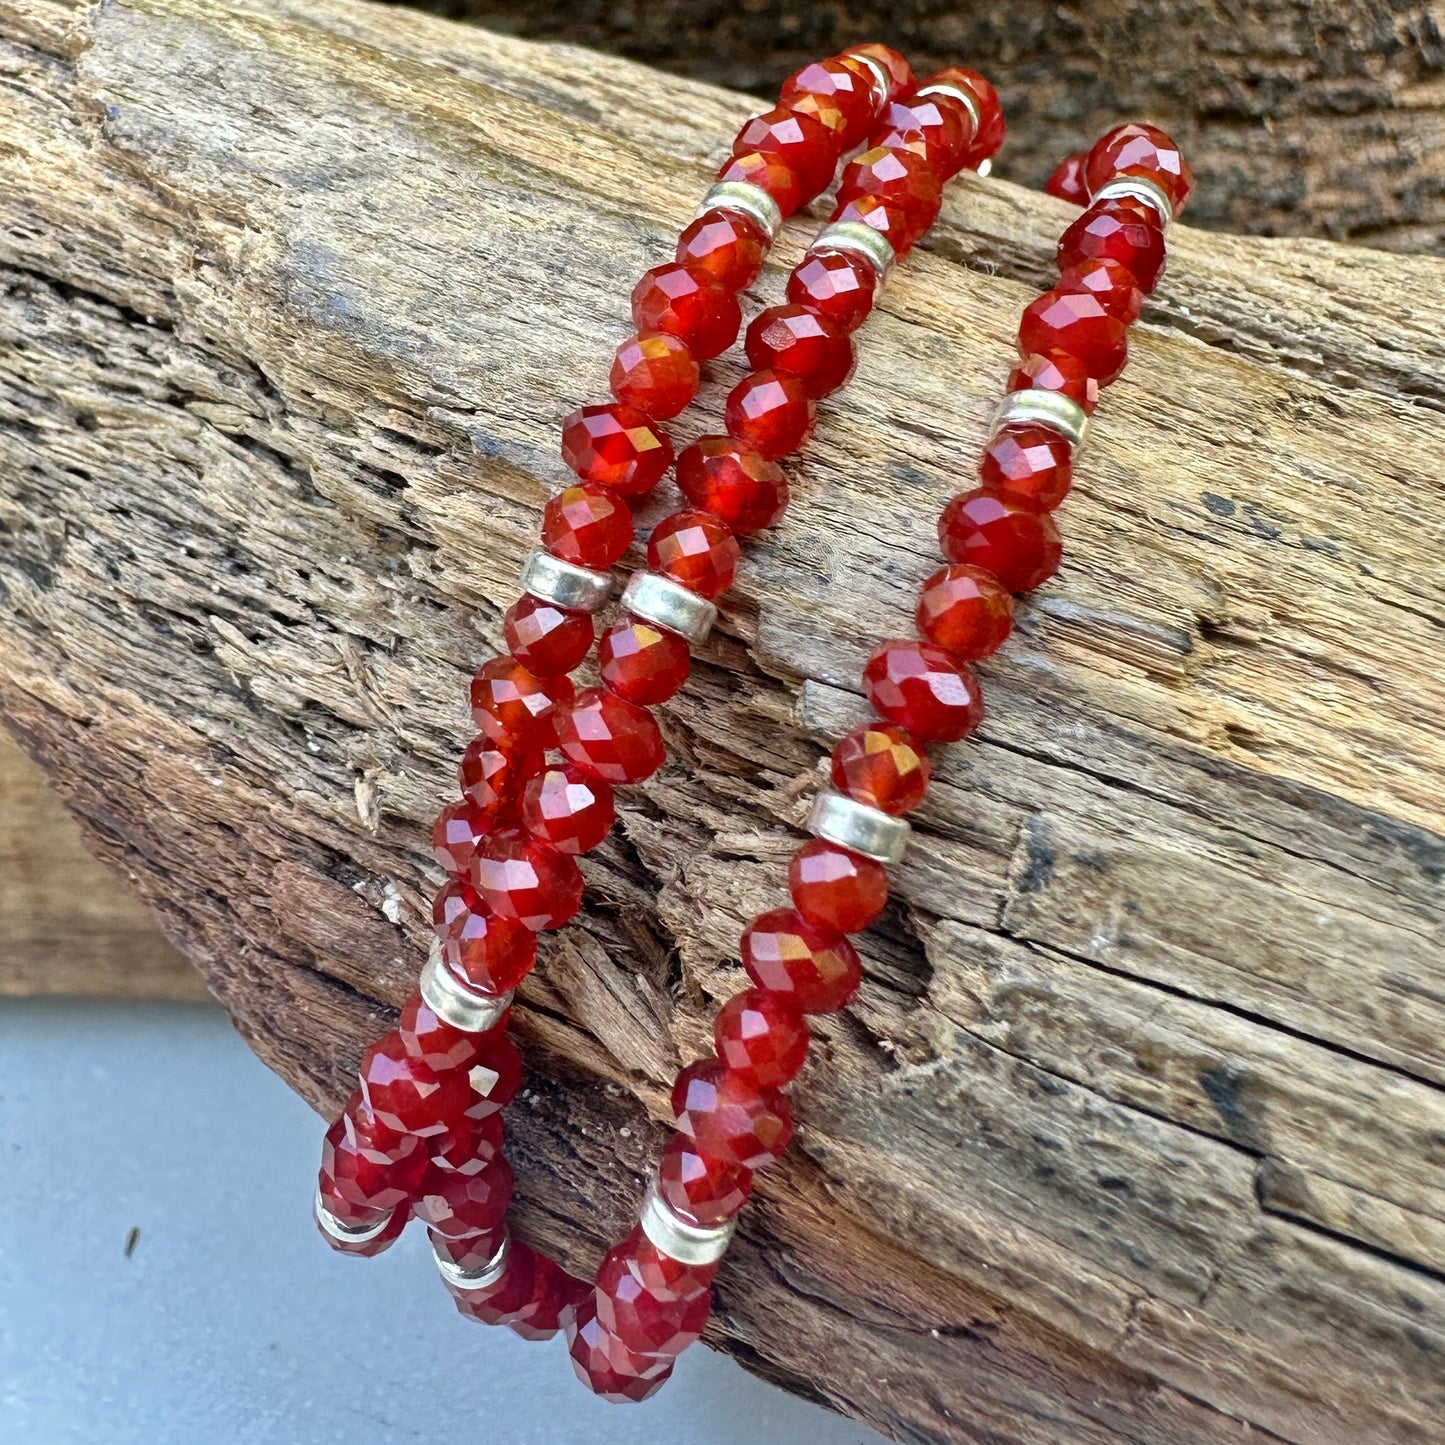 Red Agate Convertible Bracelet/Necklace